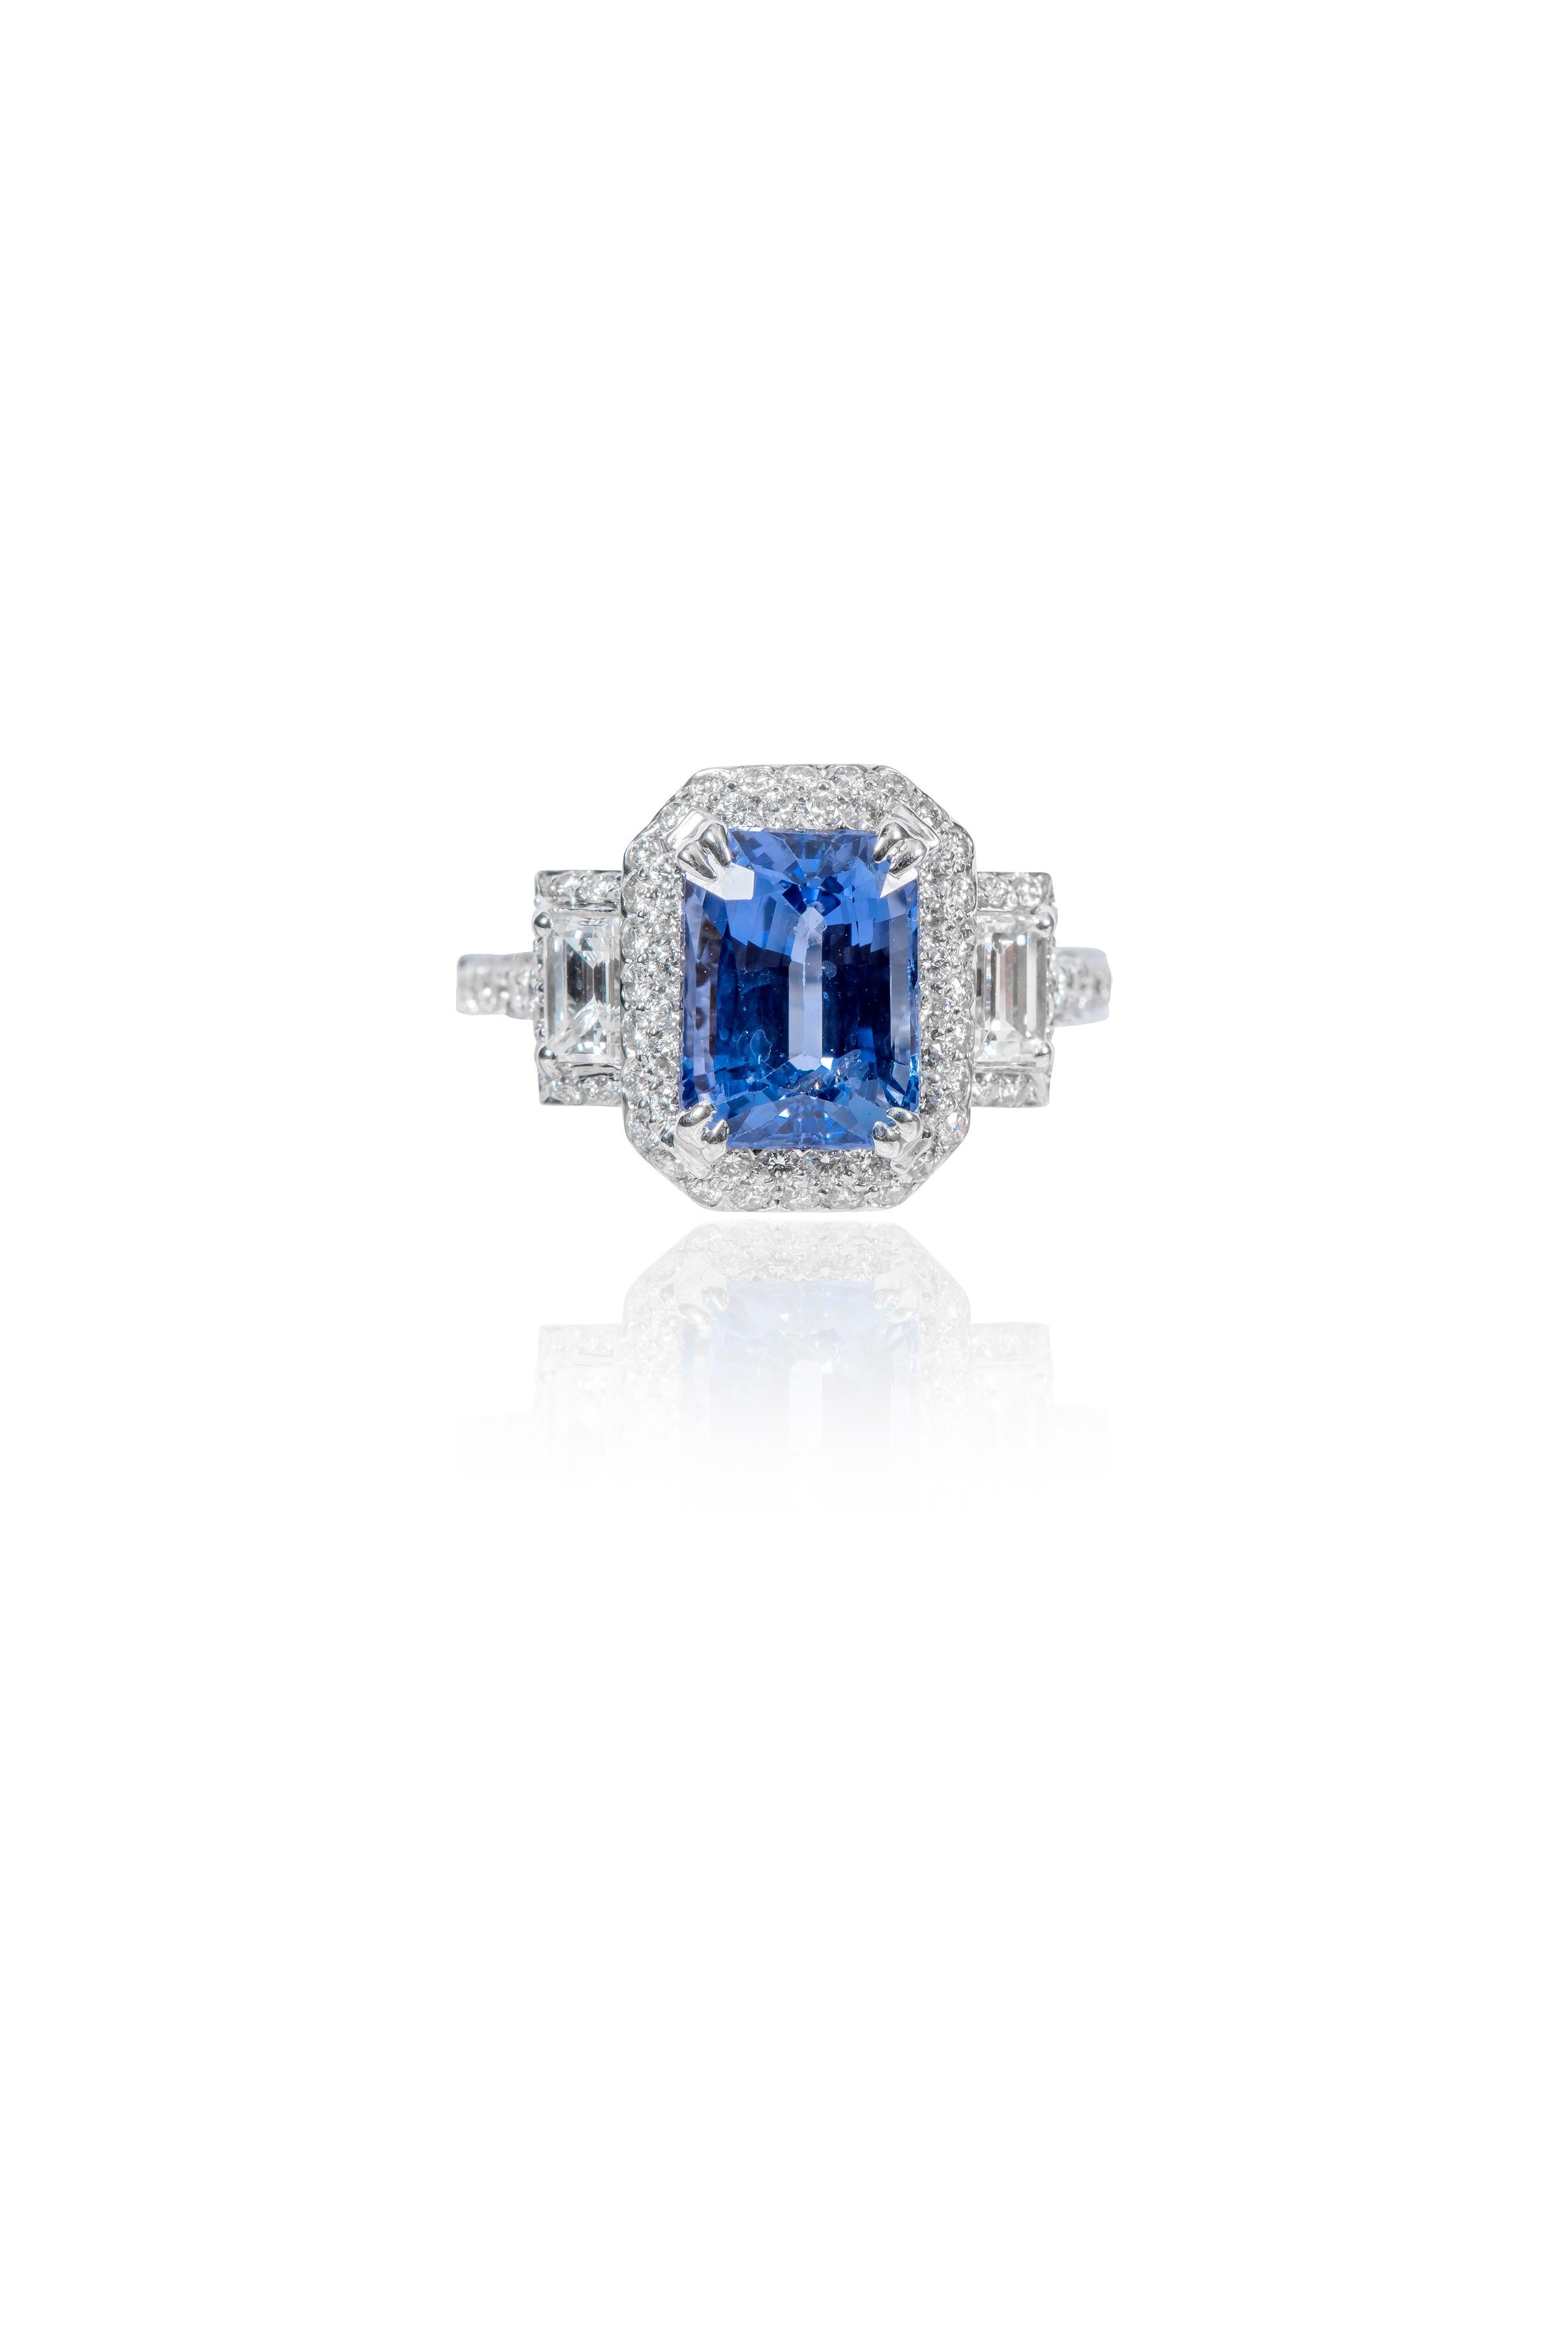 18 Karat White Gold 2.36 Carat Sapphire and Diamond Three-Stone Cluster Ring For Sale 1